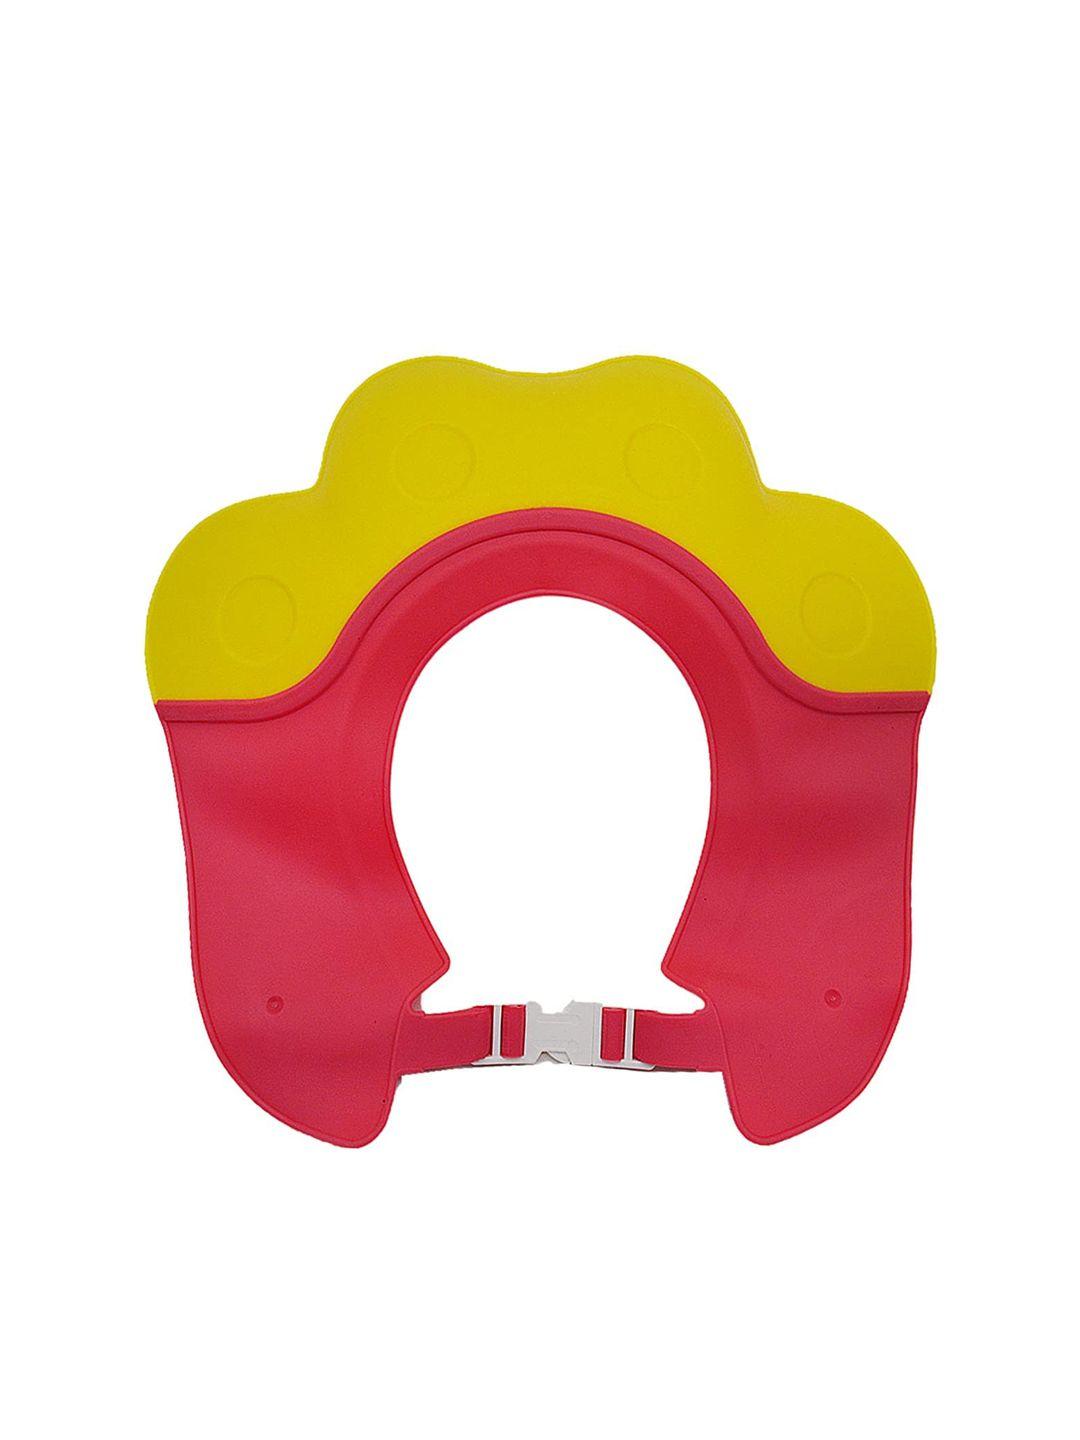 syga kids red & yellow shower bathing protection cap